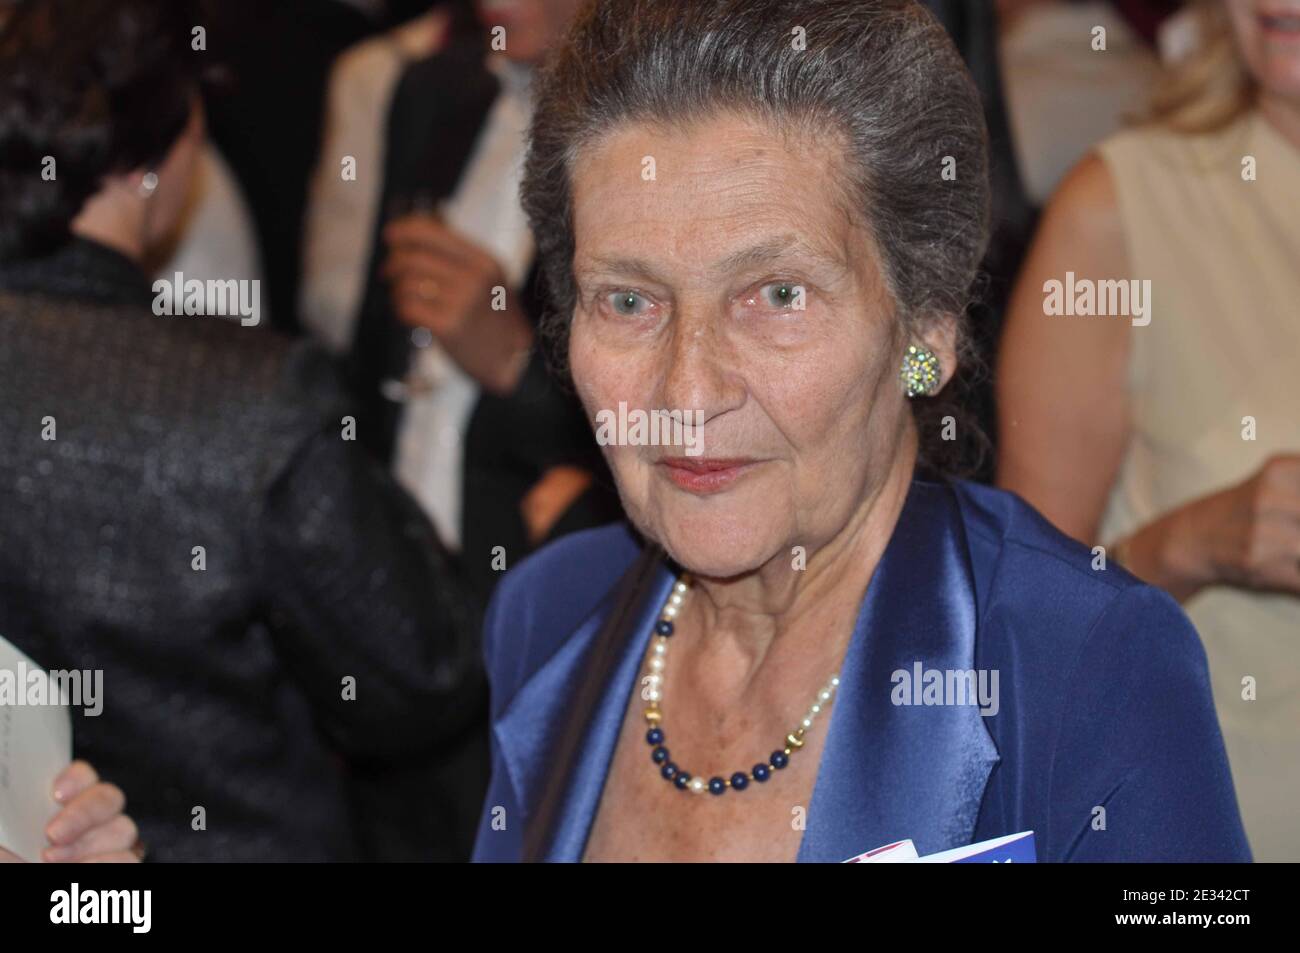 Simone Veil attends a concert hosted by Hadassah France Association to benefit the Hadassah Medical and Research Center in Jerusalem and to mark the 20th anniversary of conductor Leonard Bernstein's death, at the Theatre du Chatelet in Paris, France on September 21, 2010. Photo by Christophe Pau/ABACAPRESS.COM Stock Photo